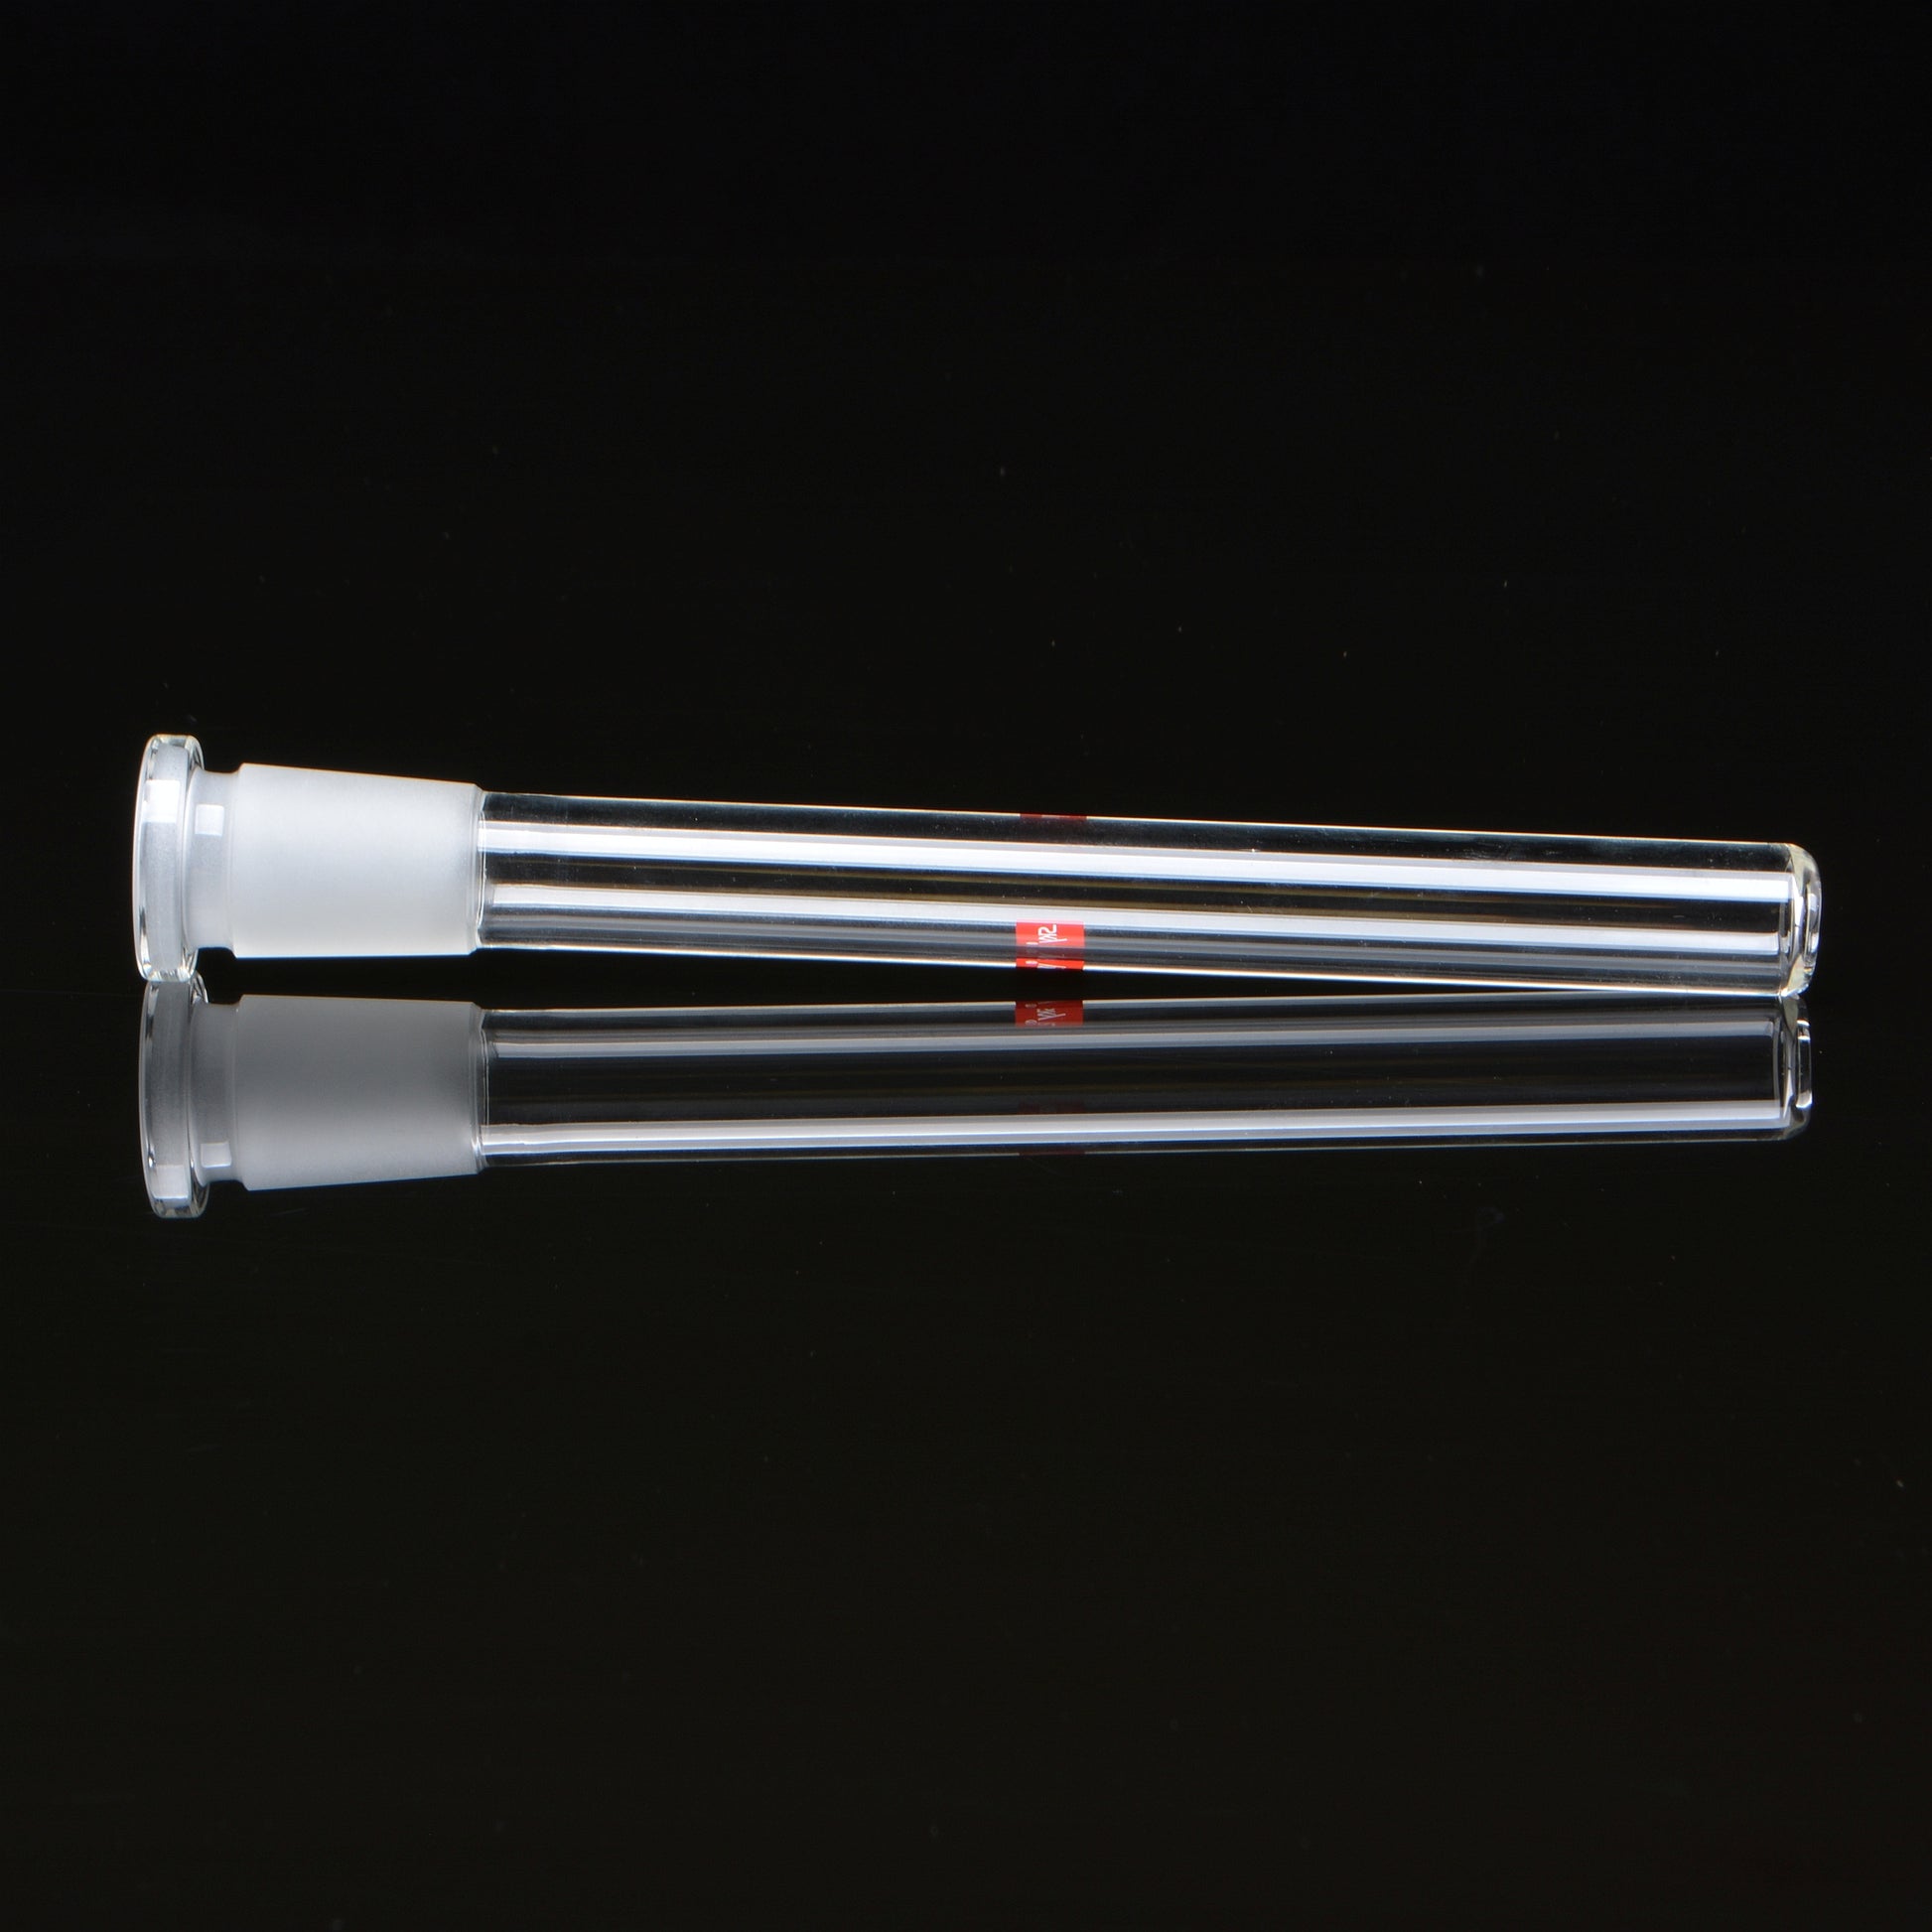 Reflective shot of the oldschool style downstem